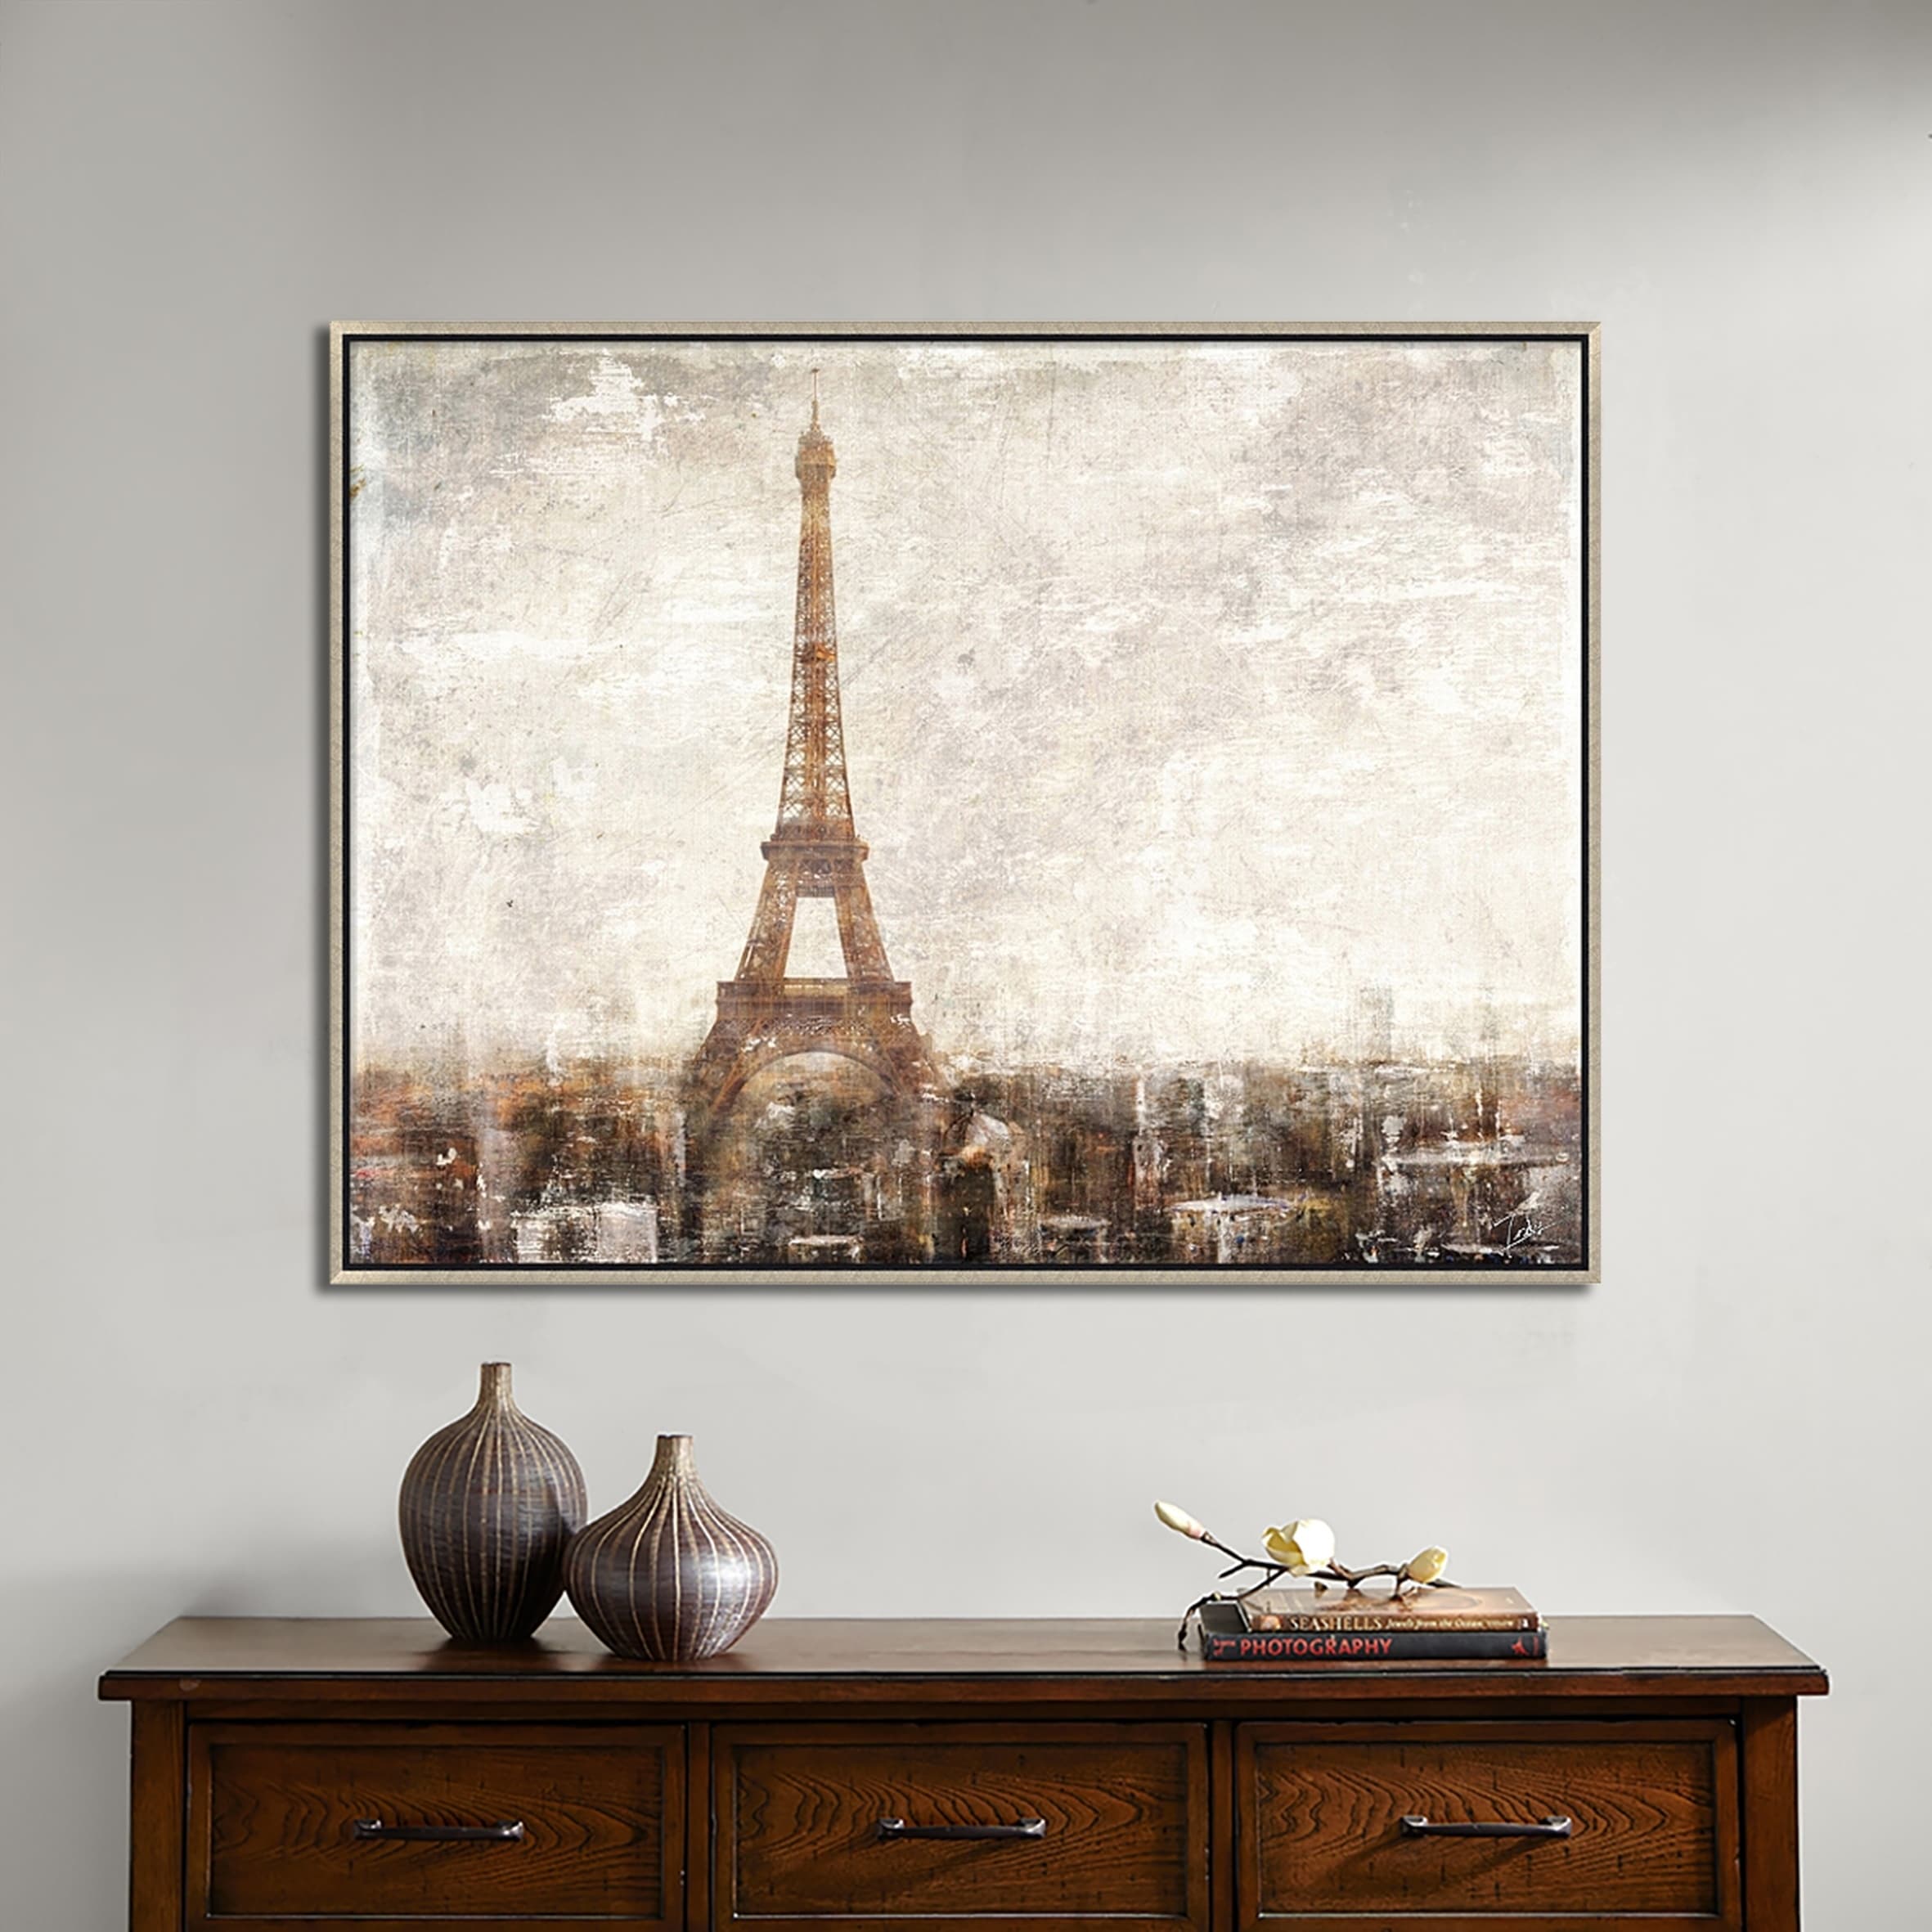 Shop Hand Painted Acrylic Wall Art Paris Eiffel Tower On A 47 X 35 Rectangular Canvas With A Silver Wooden Frame On Sale Overstock 30427226